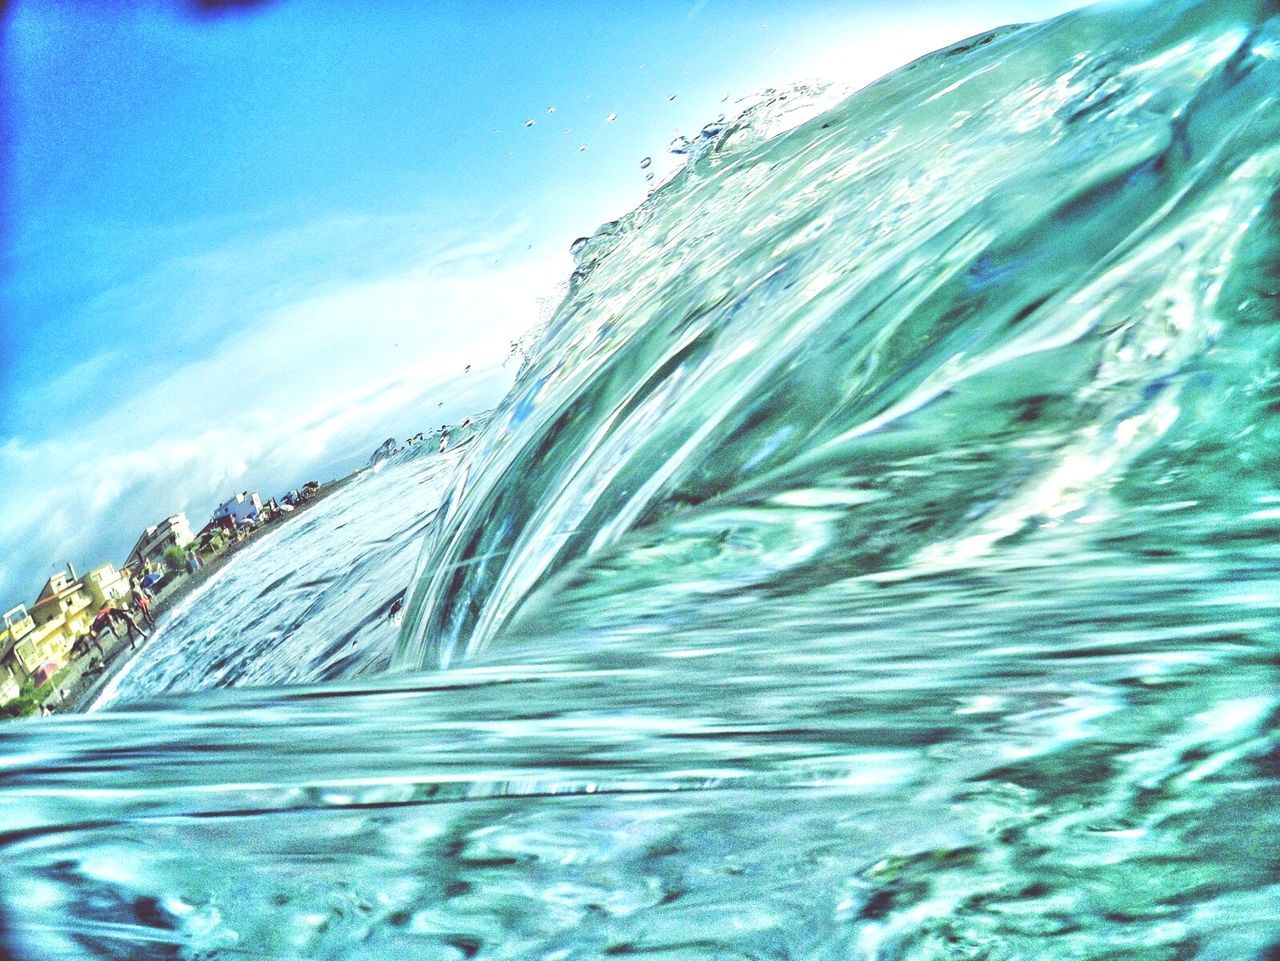 CLOSE-UP OF WAVE AGAINST SEA